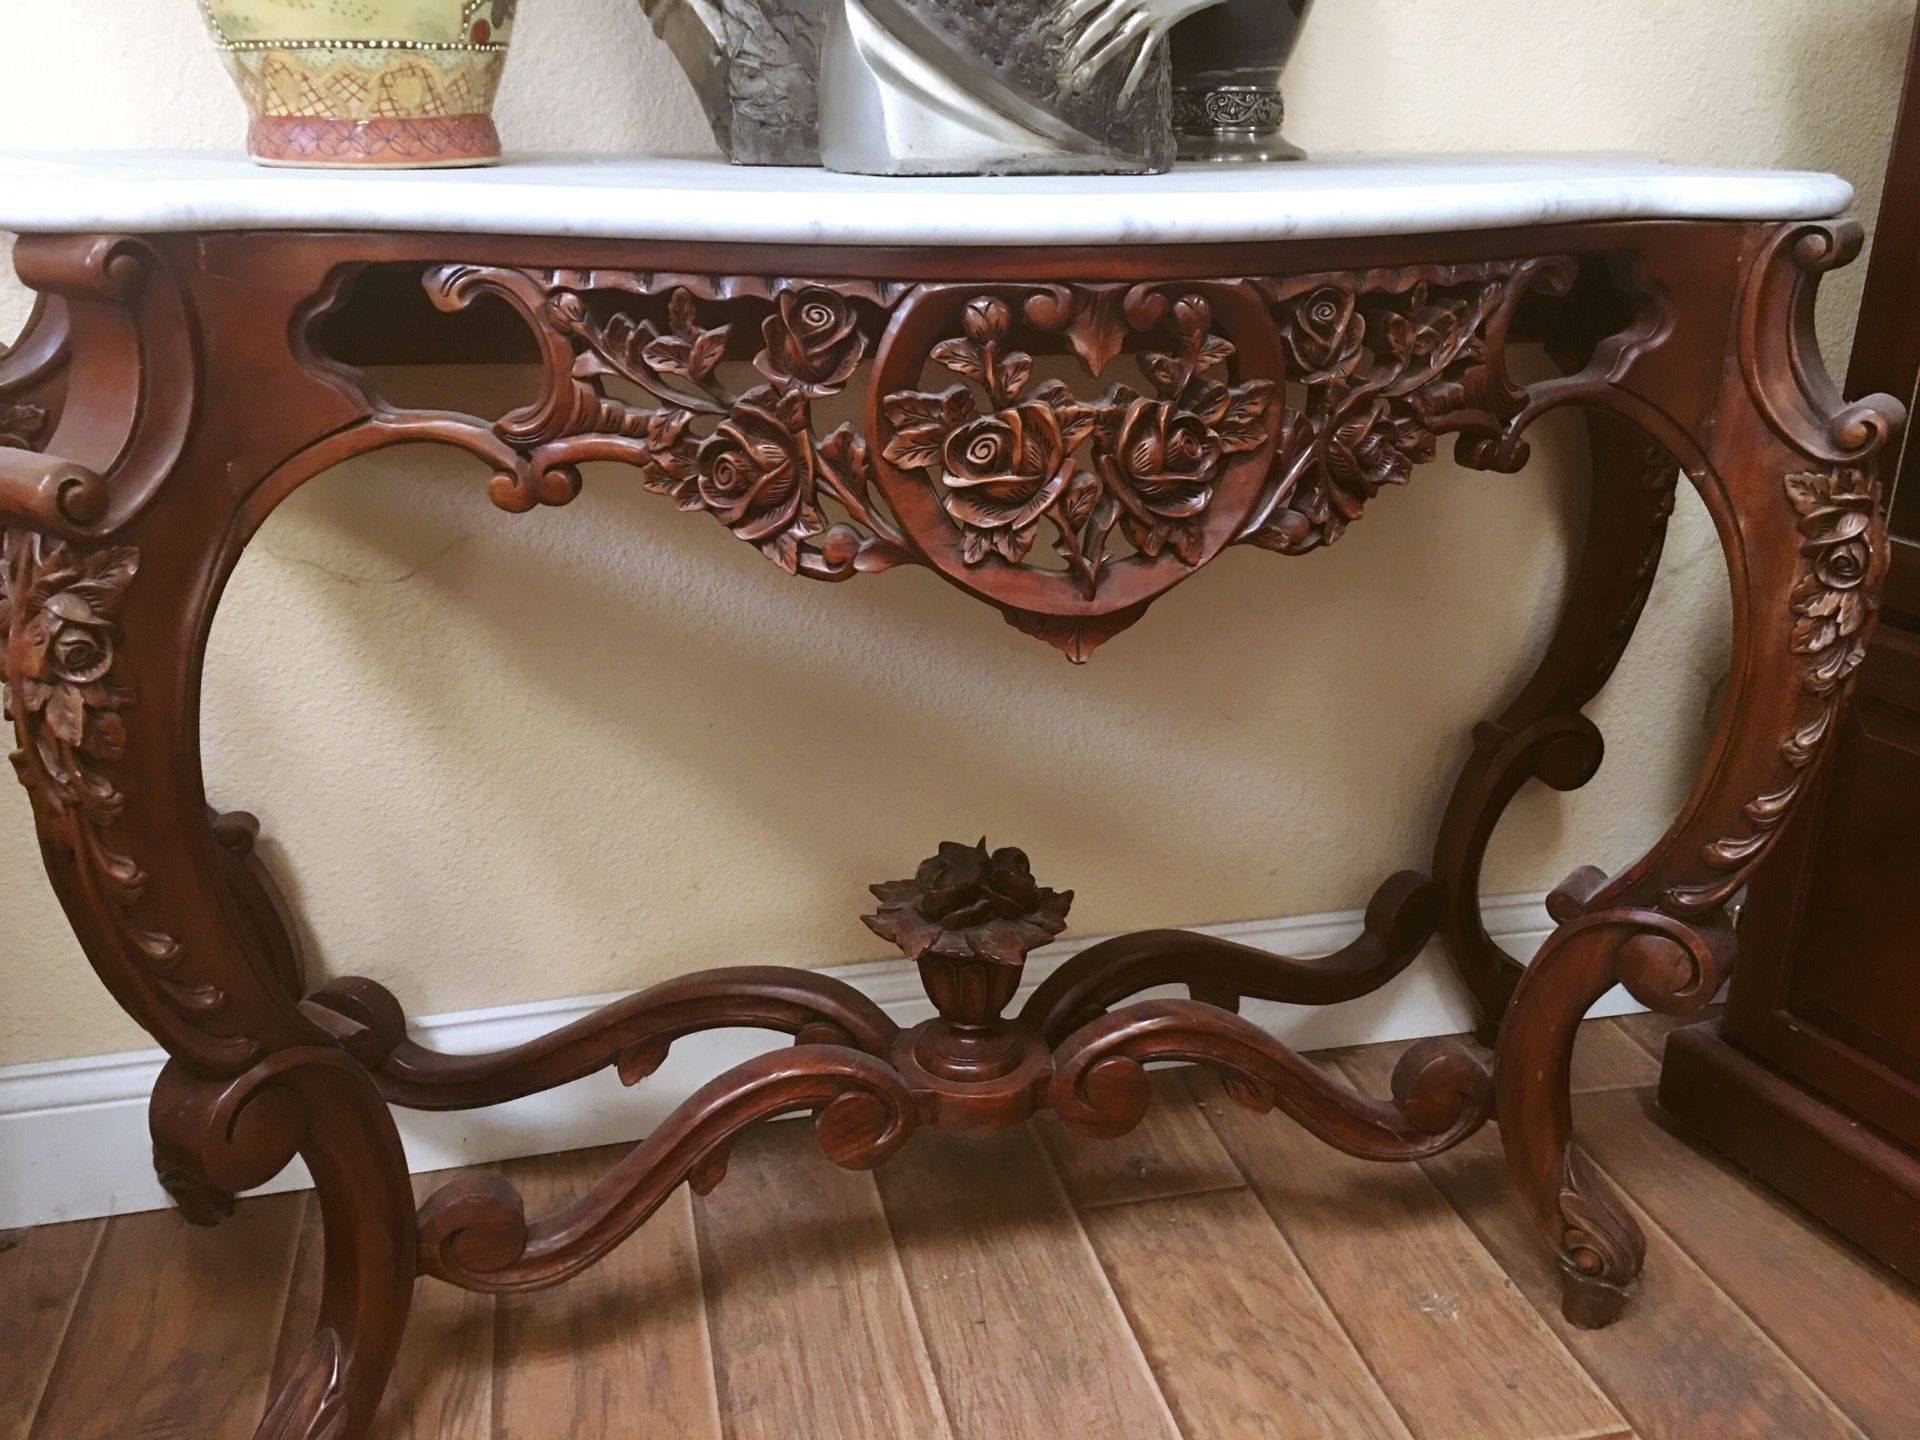 Lovely Console Table- one of a kind! If you want a special table that is not ordinary, if yes so this one is for you. It has Real marble on top and i